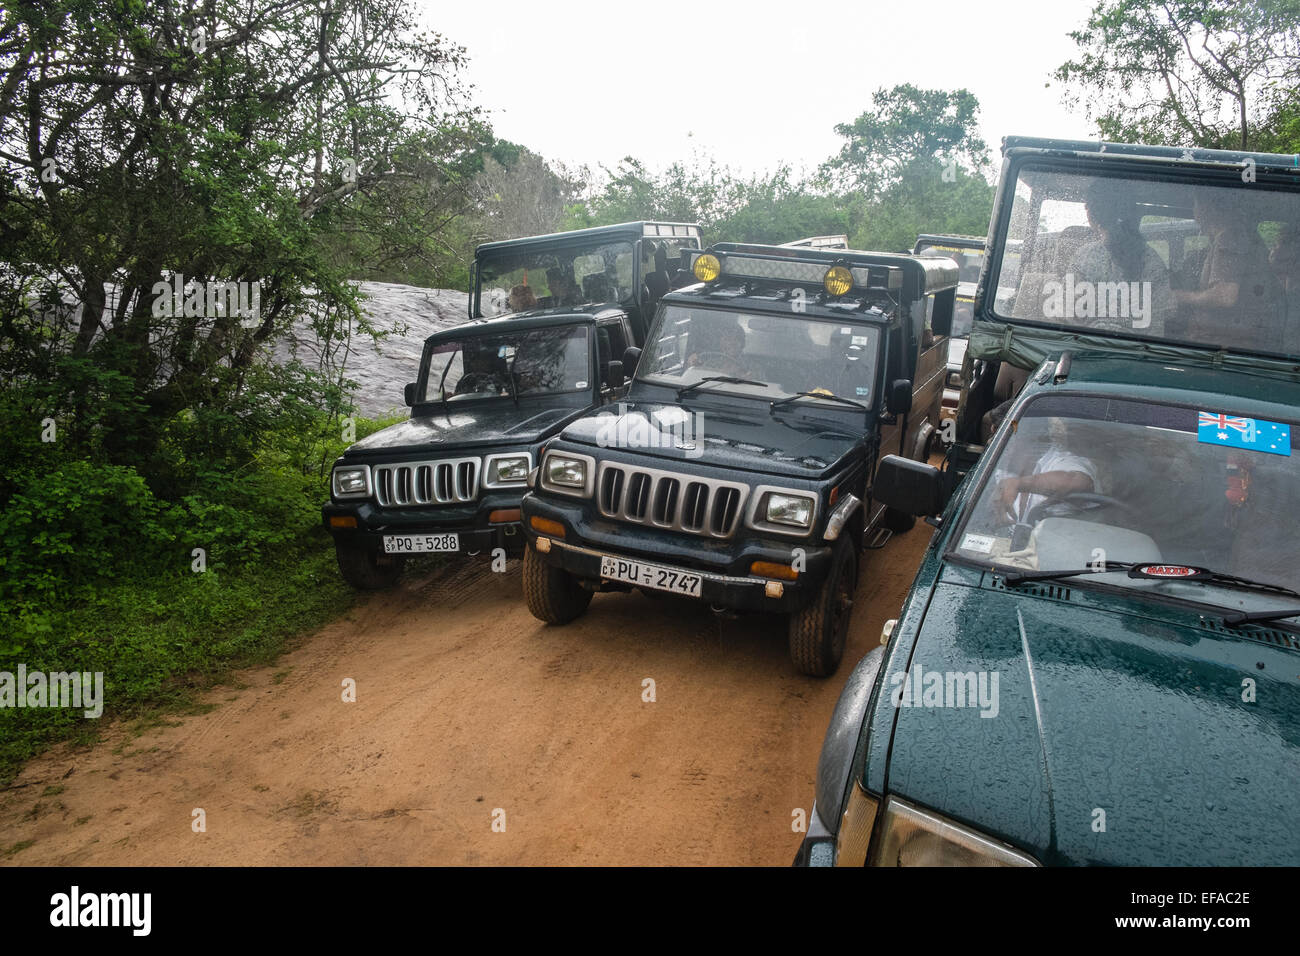 Tourists in jeeps traffic jams while chasing wildlife,especially leopards,in packs of vehicles.Yala National Park,Sri Lanka. Stock Photo